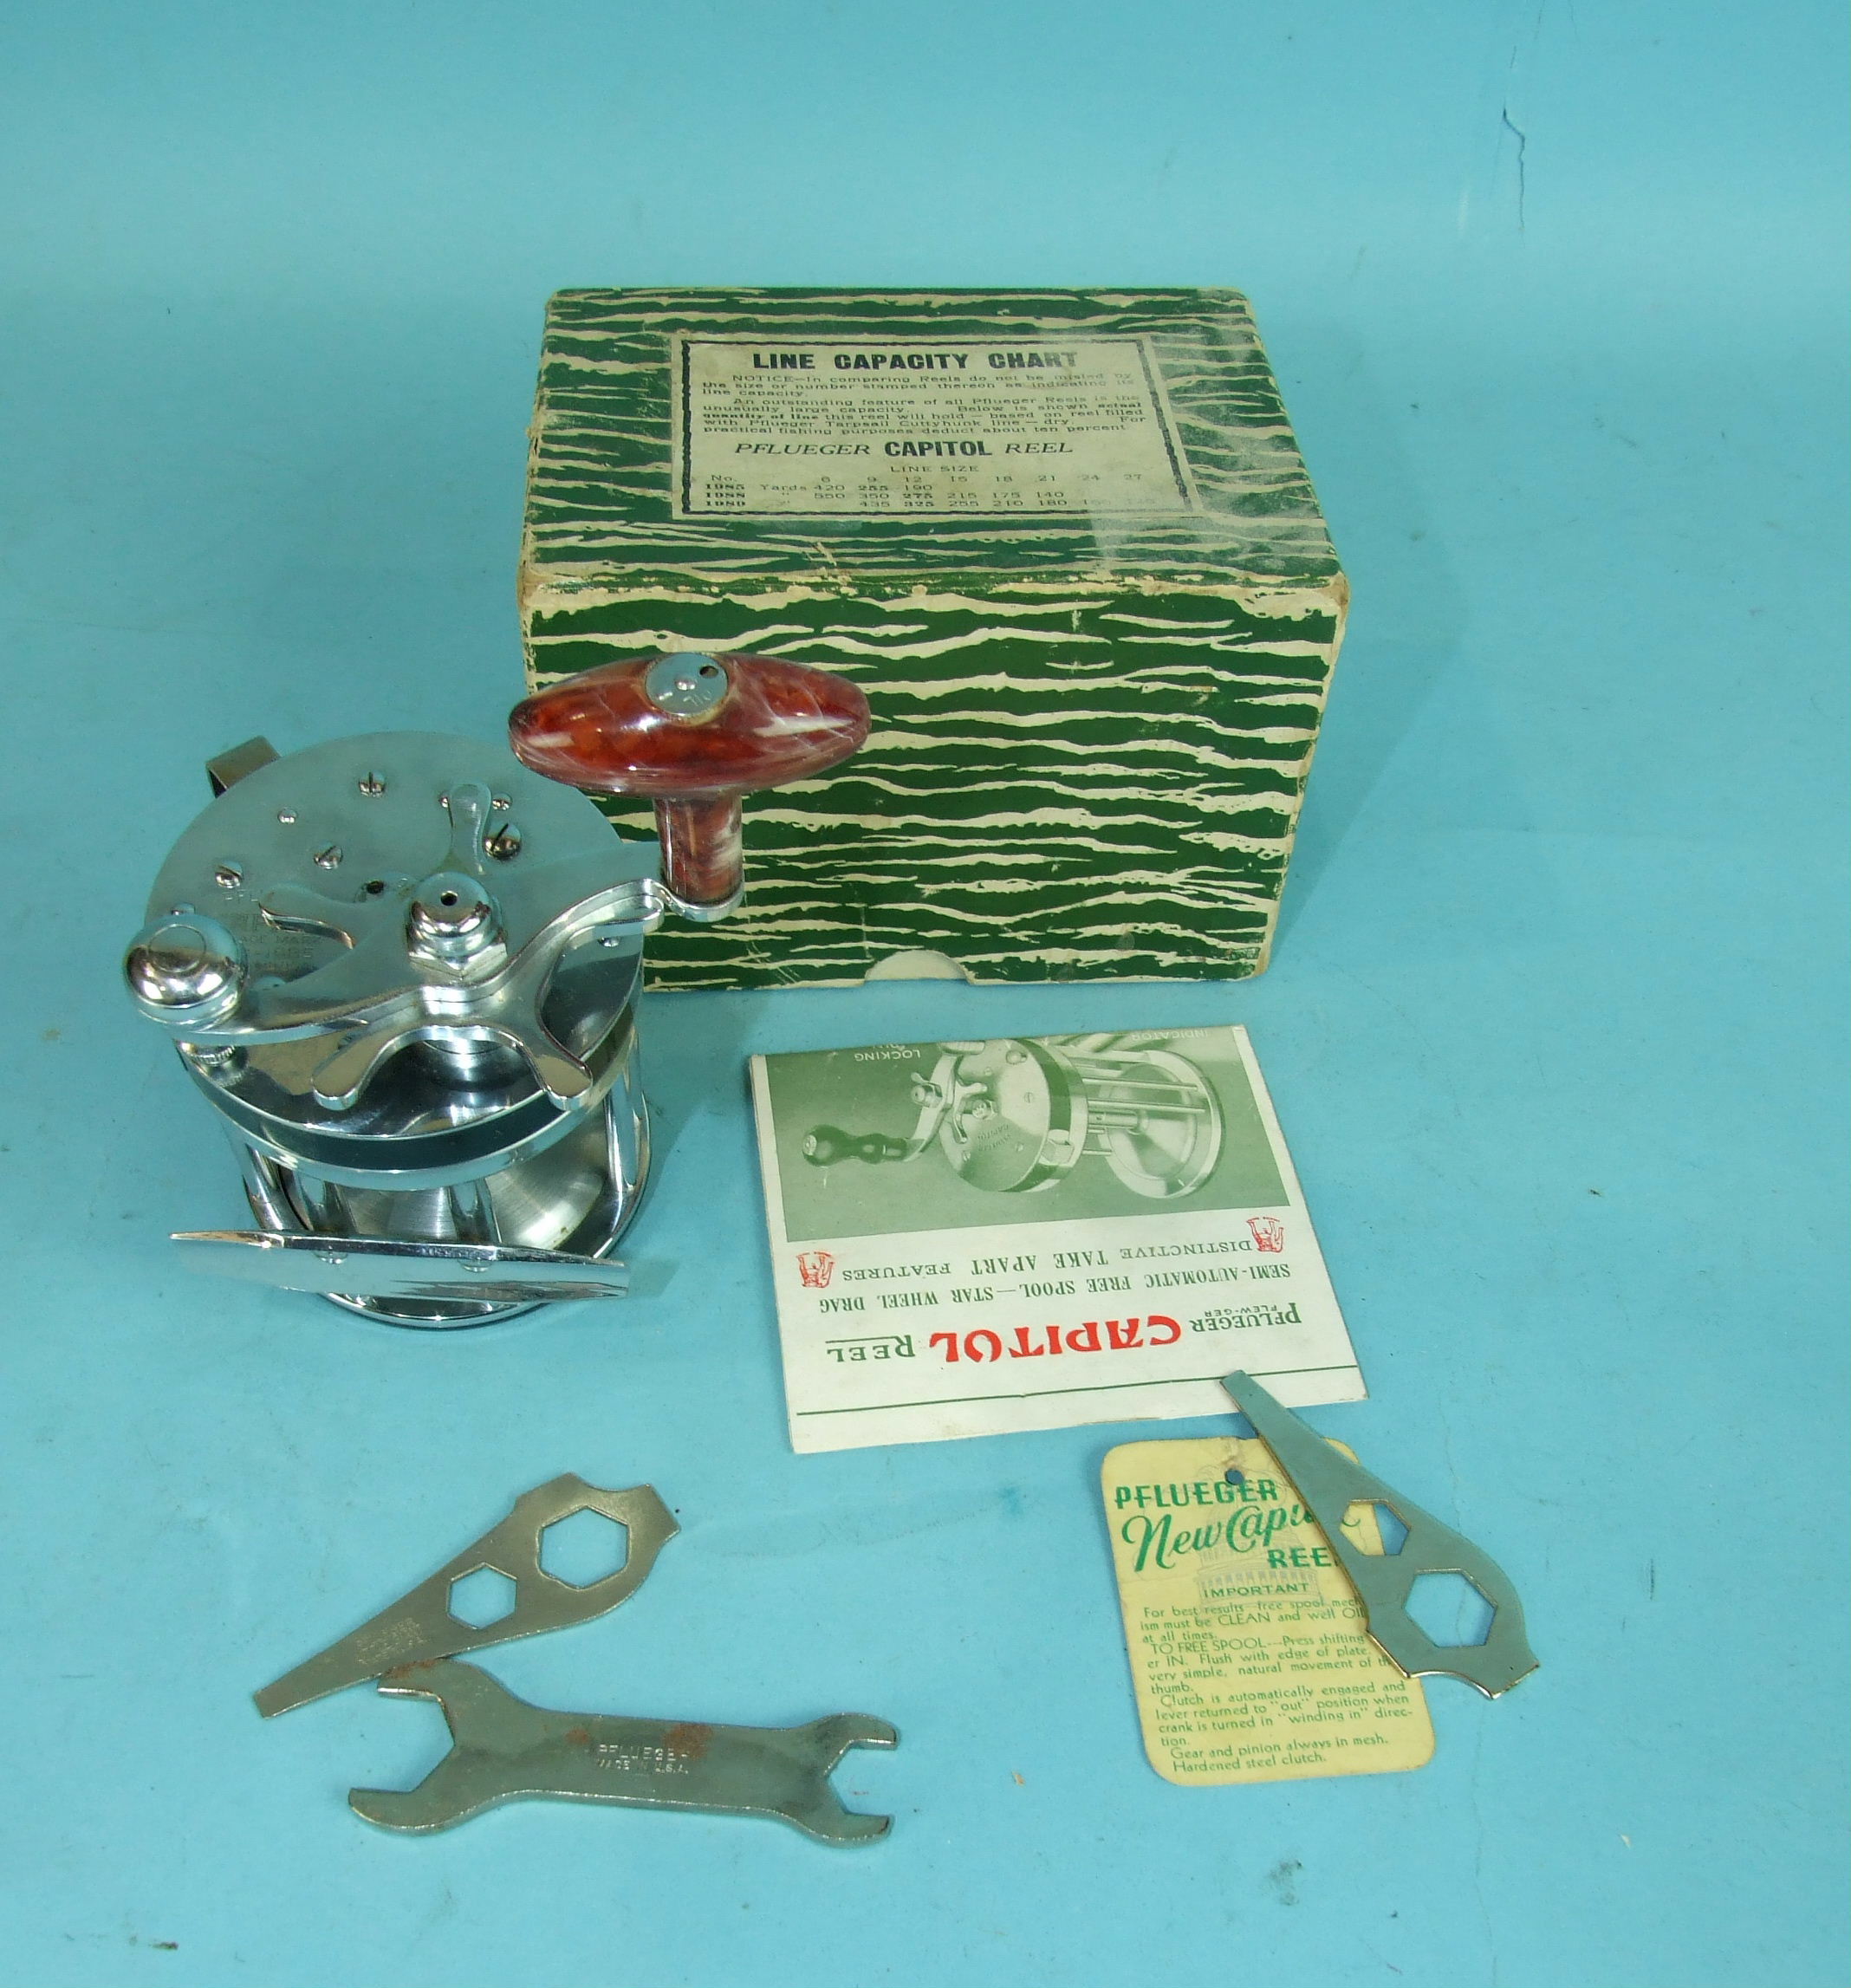 A Pflueger Capitol No.1985 Surf casting reel with spanners and instructions, boxed. - Image 2 of 2